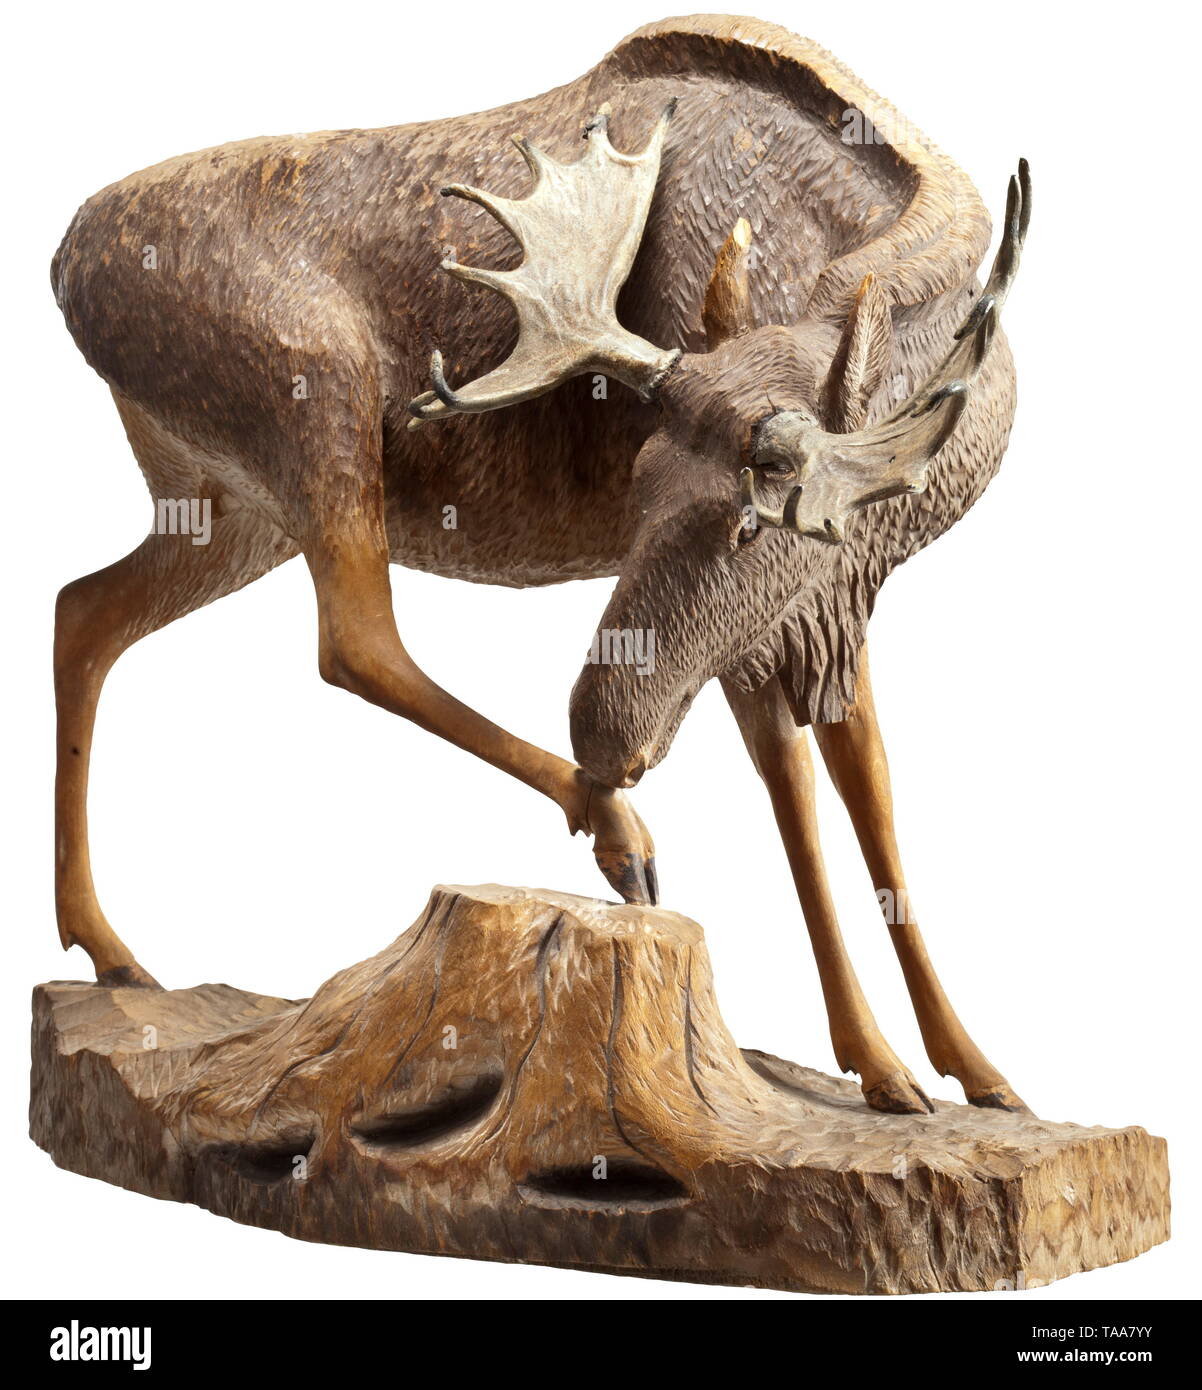 An officer's gift from Eduard Dietl (1890 - 1944) to his 1st general staff officer Oberst Sittmann Carved three-dimensional depiction of a bull elk in the finest artistic quality, the antlers of lacquered lead, the lower side with inscription 'Eismeerfront/März 1943 seinem 1. Generalstabsoffizier der kommandierende General' (tr. 'Polar Sea front/March 1943 to his 1st General Staff Officer from the Commanding General'). Minimal blemishes. Height 33 cm. historic, historical, mountain infantry, troops, army, armed forces, military, militaria, object, Additional-Rights-Clearance-Info-Not-Available Stock Photo